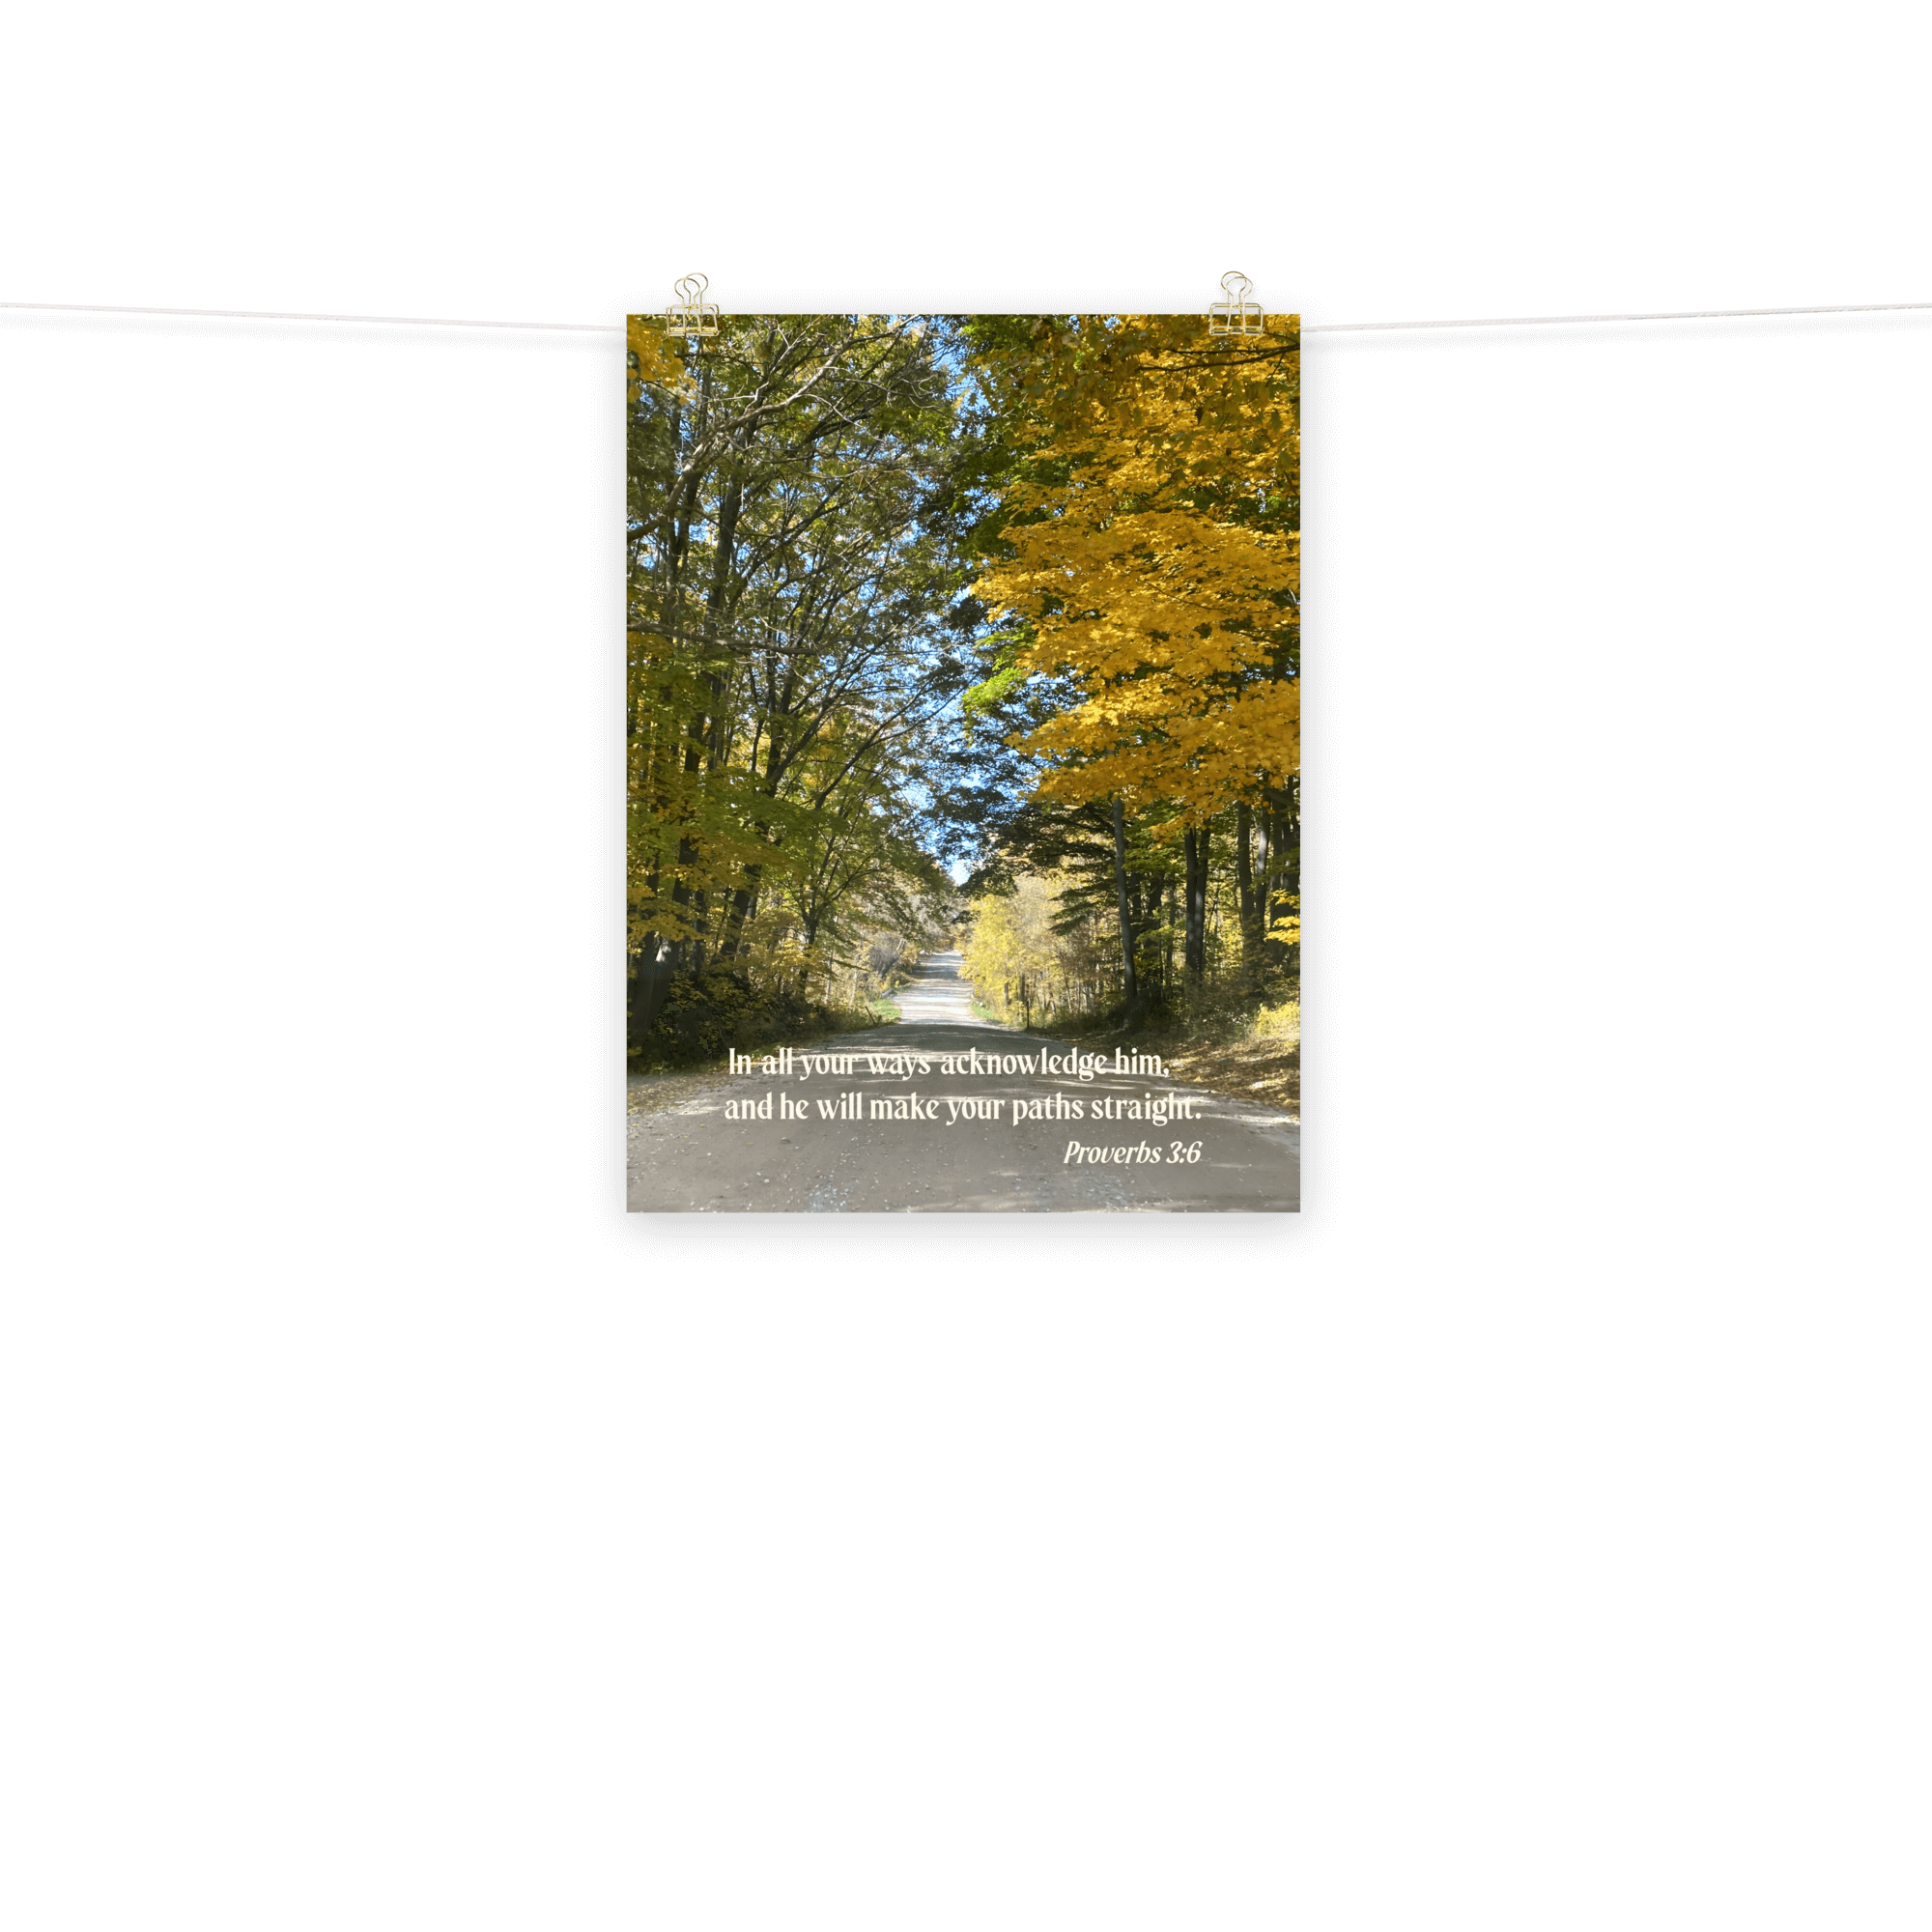 Prov 3:6, Bible Verse, Fall Road Poster